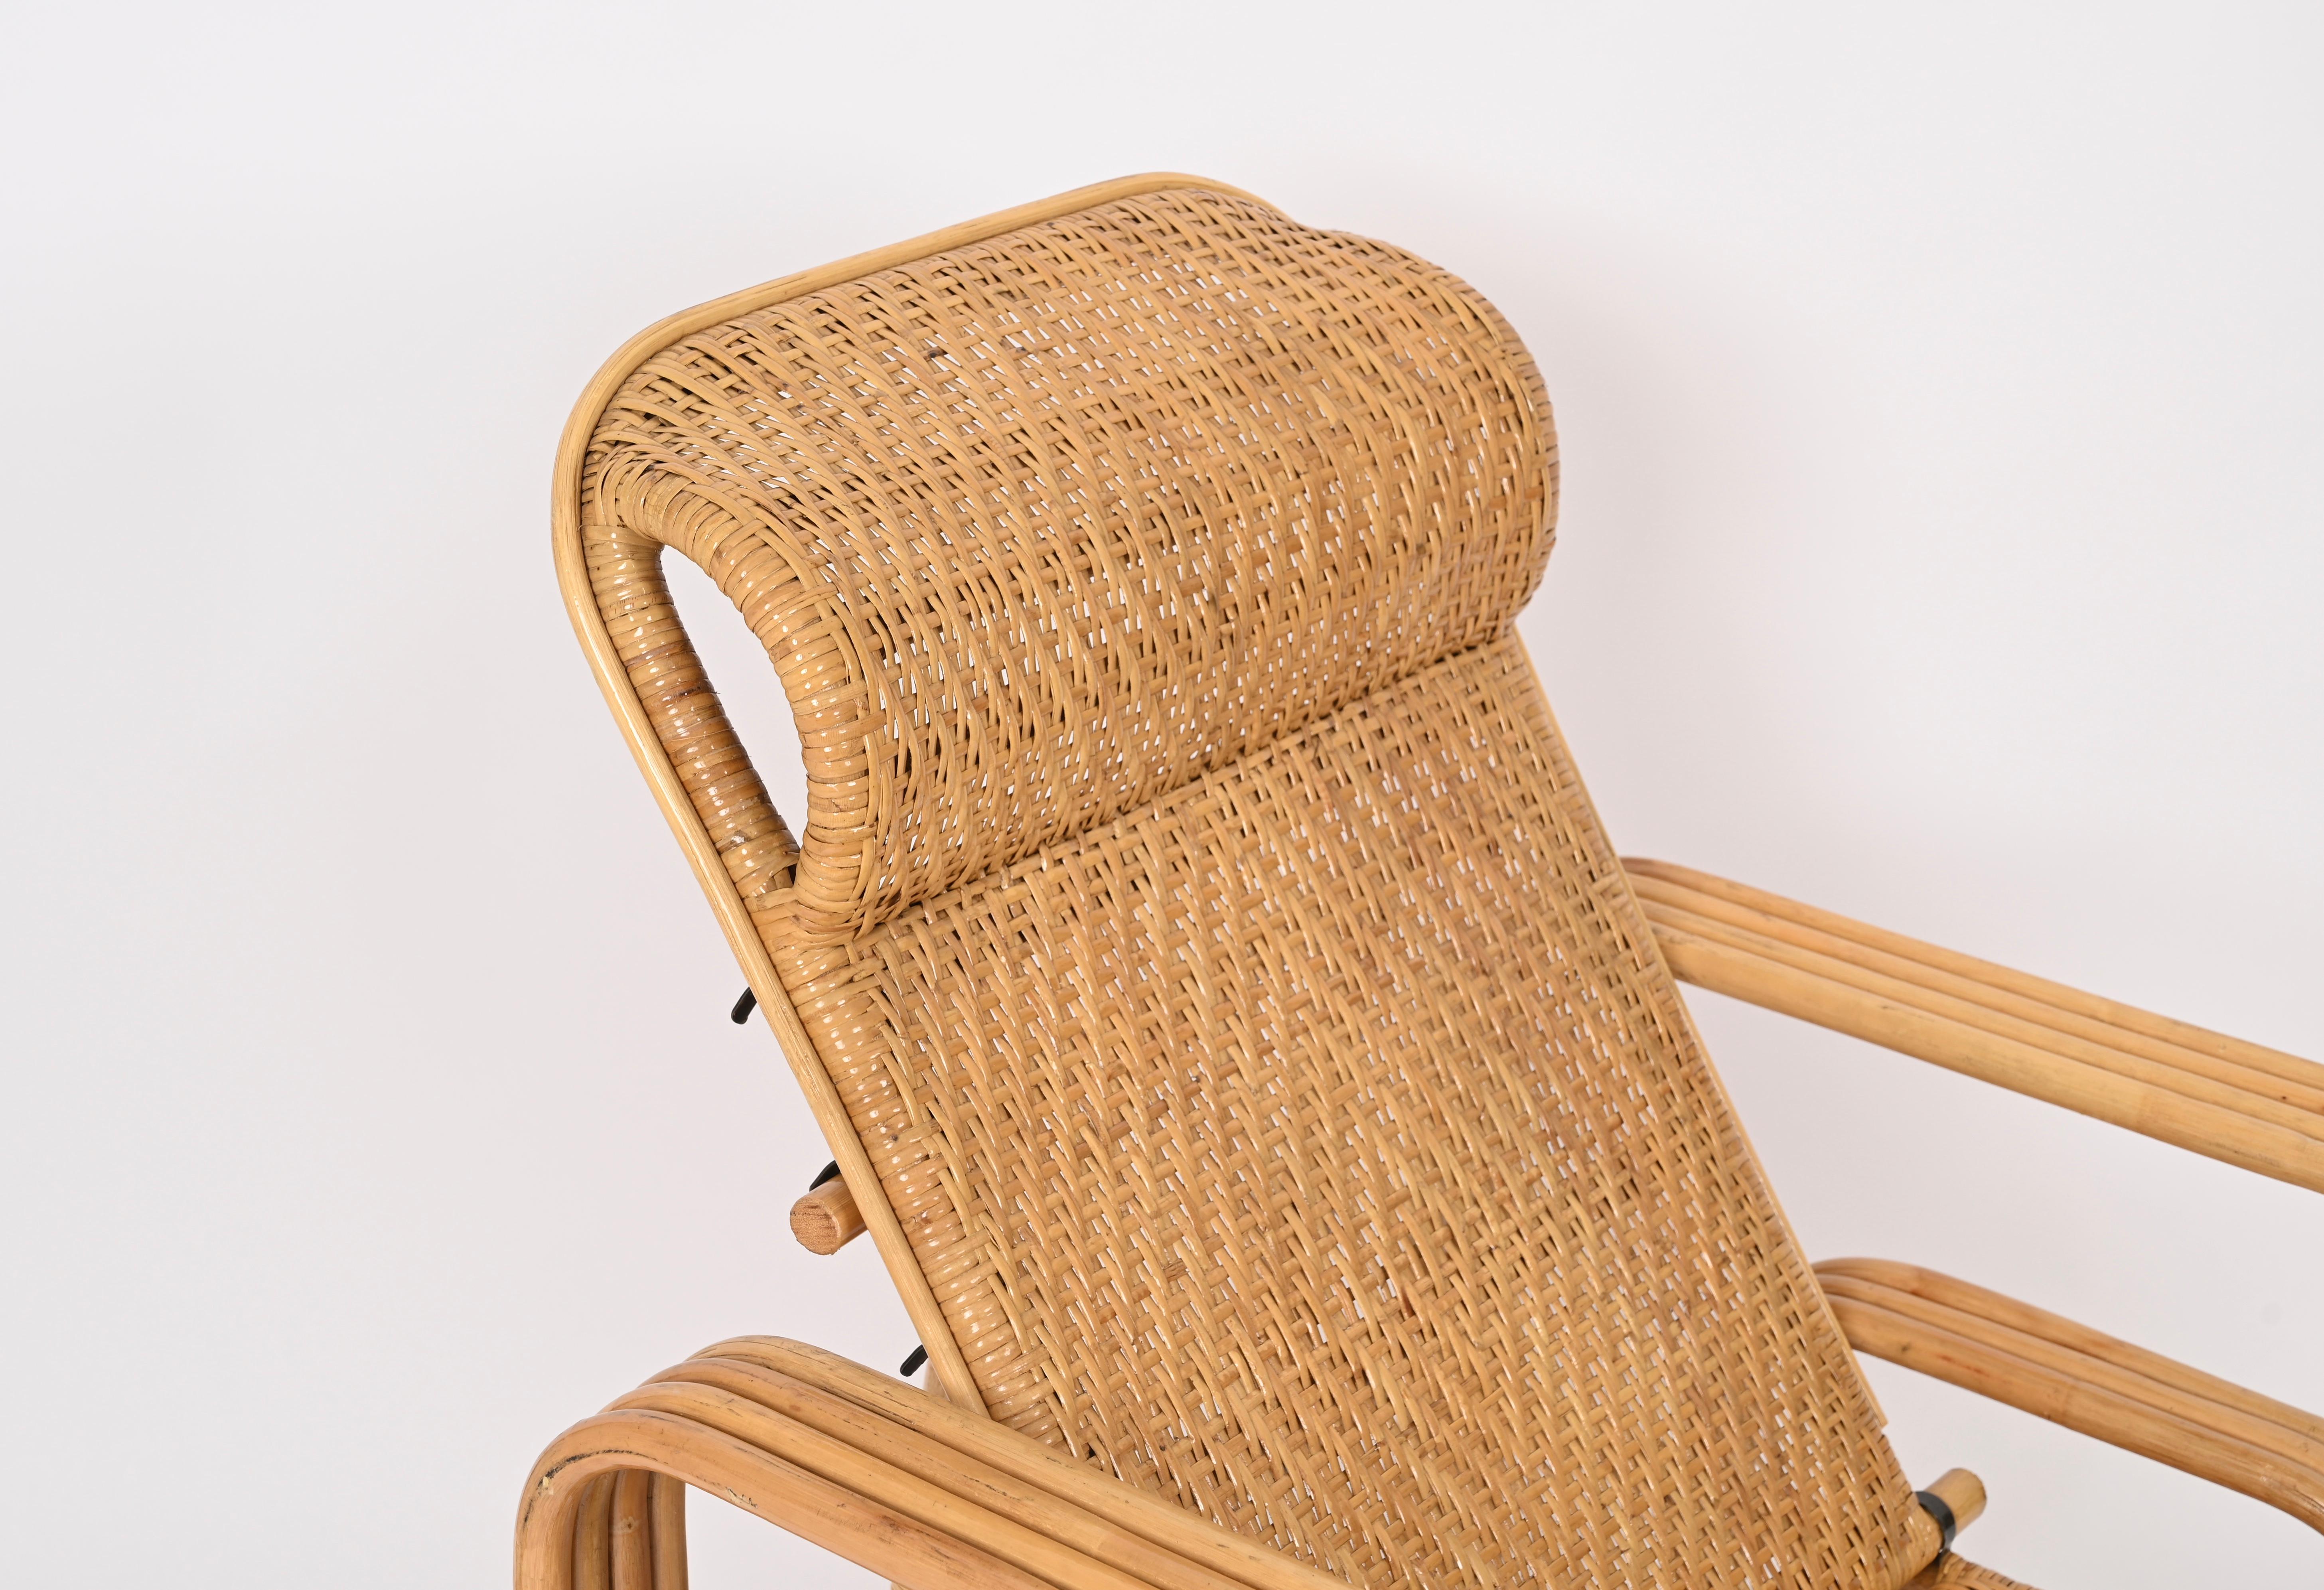 Pair of Adjustable Chaise Longue / Lounge Chairs, Wicker and Rattan, Italy '70s  For Sale 1